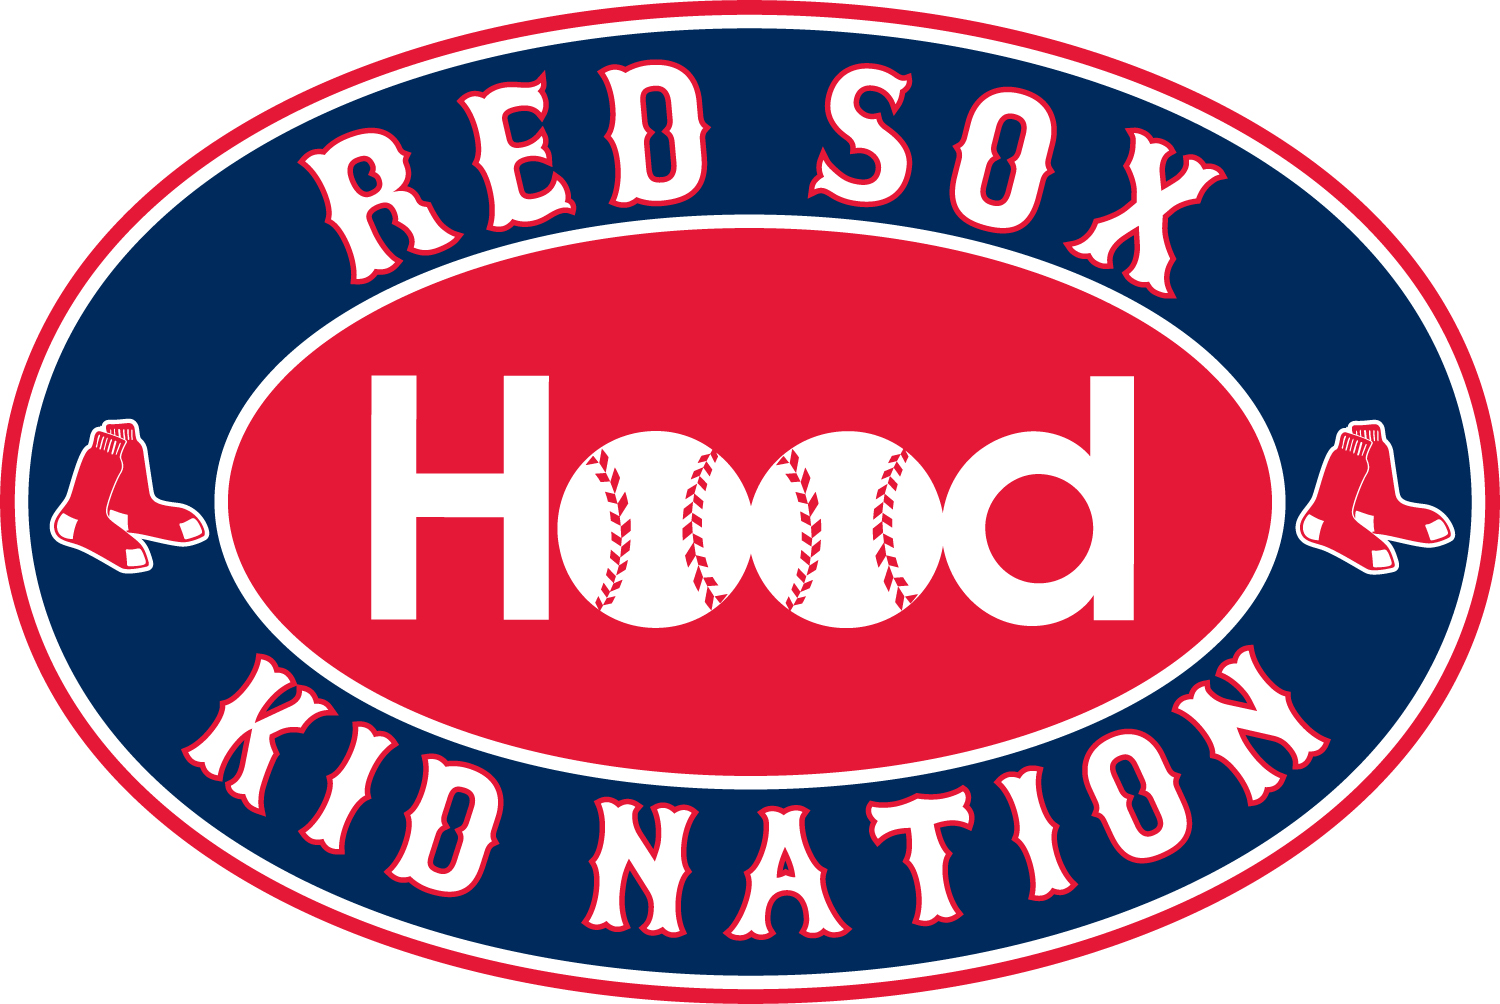 Red Sox Kid Nation Updates for 2012